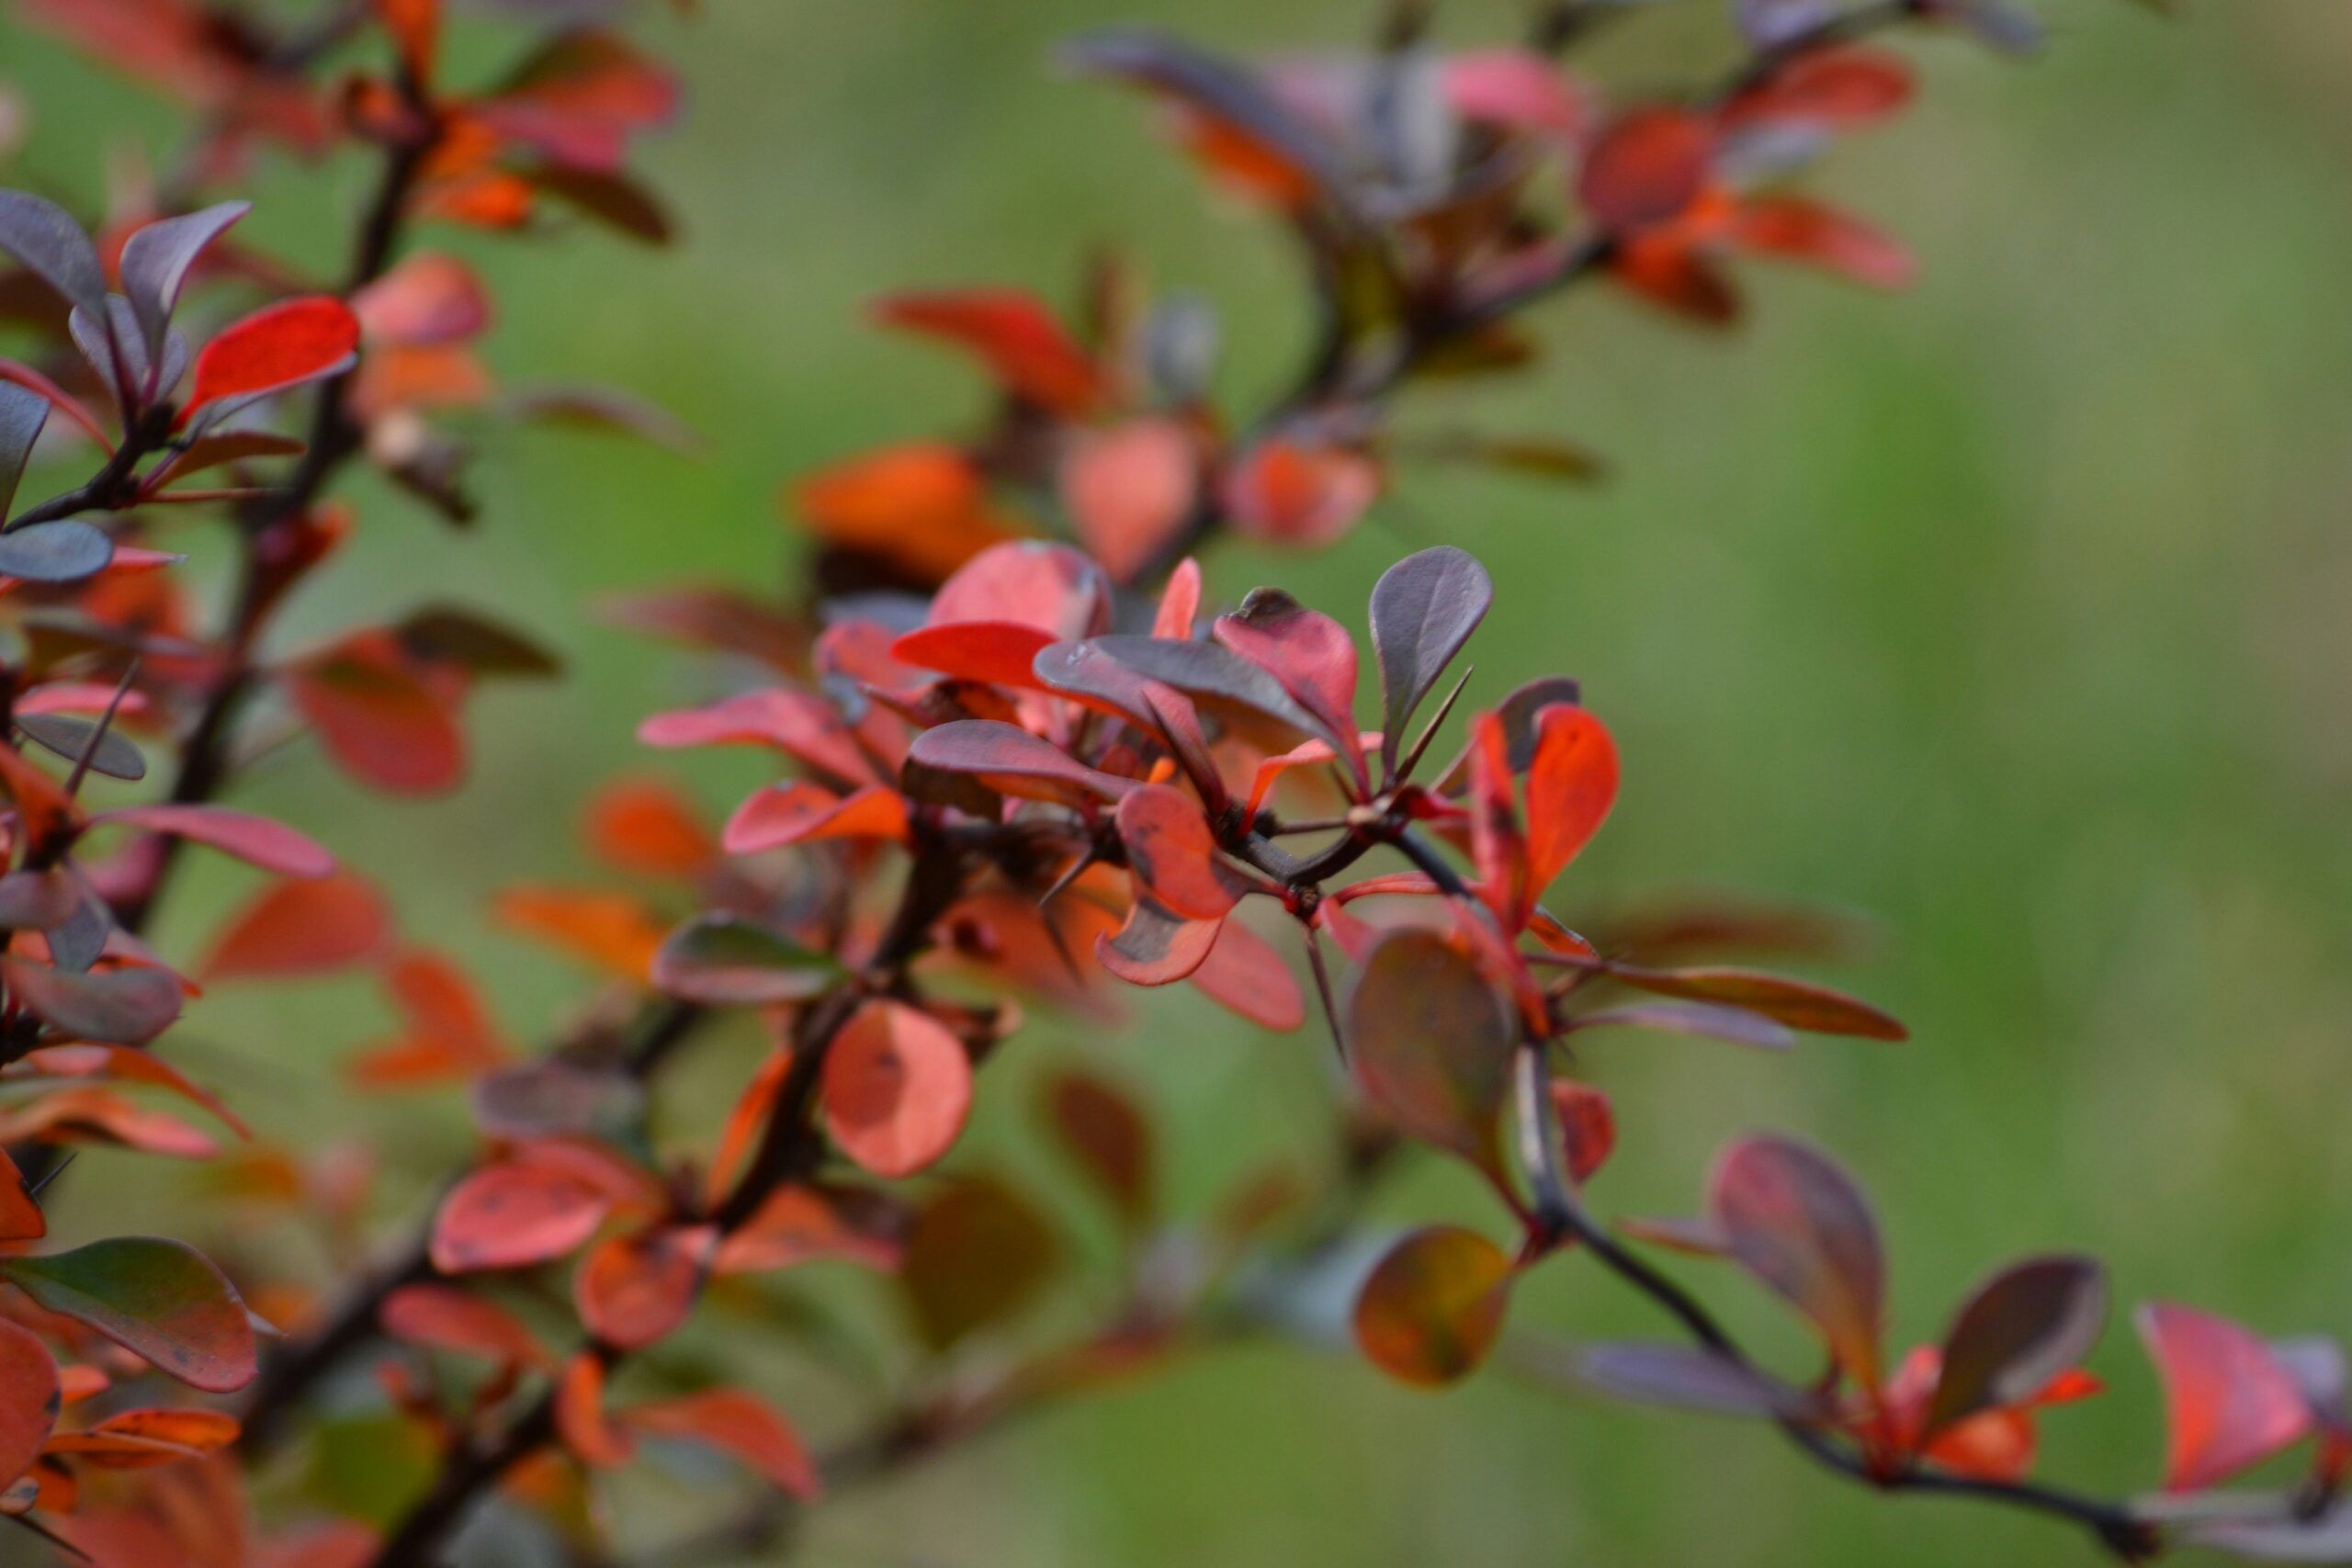 Japanese barberry invasive plant with red and green leaves-Burkholder PHC